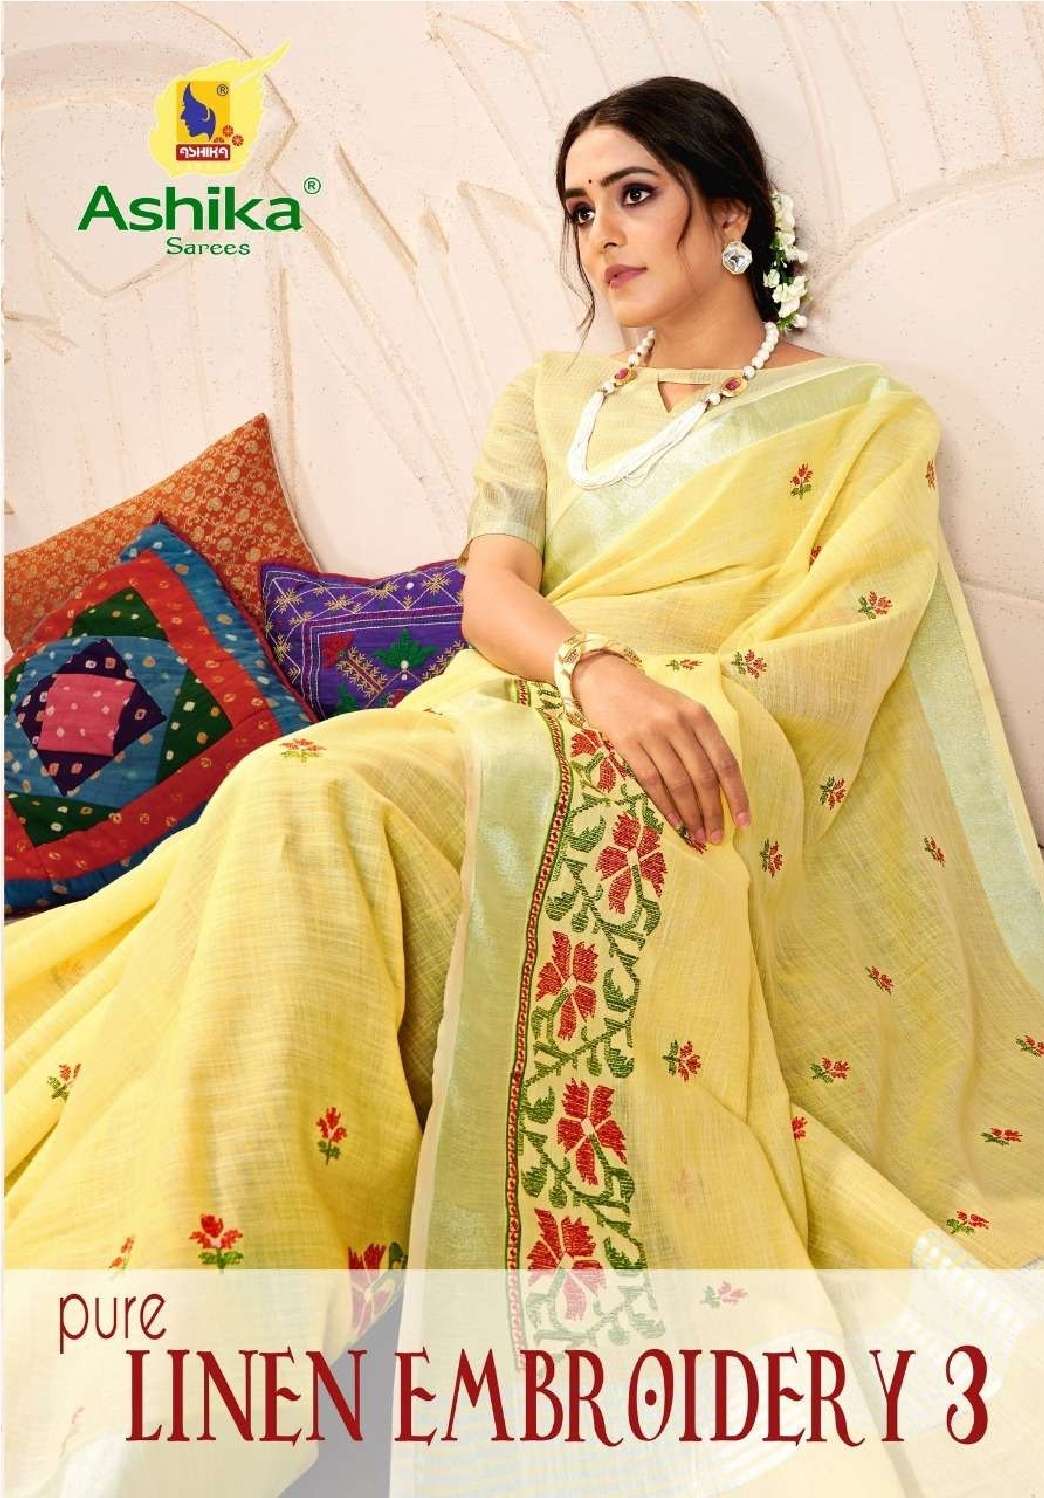 Ashika sarees presents pure linen embroidery vol-3 summer waer special embroidery work sarees catalog wholesaler and exporters 